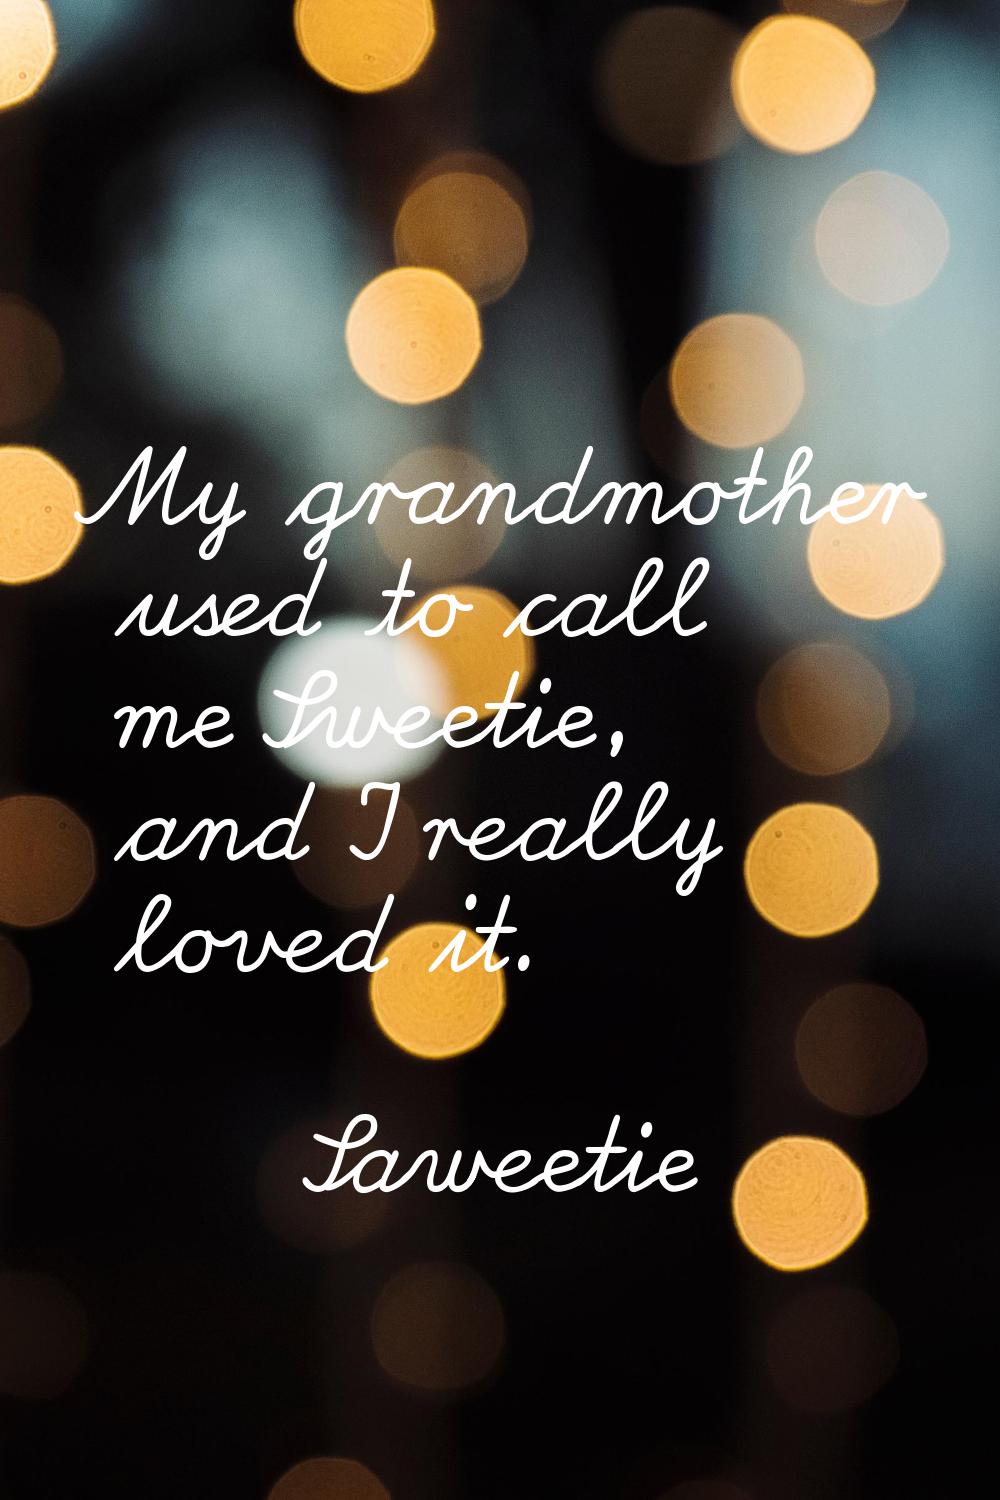 My grandmother used to call me Sweetie, and I really loved it.